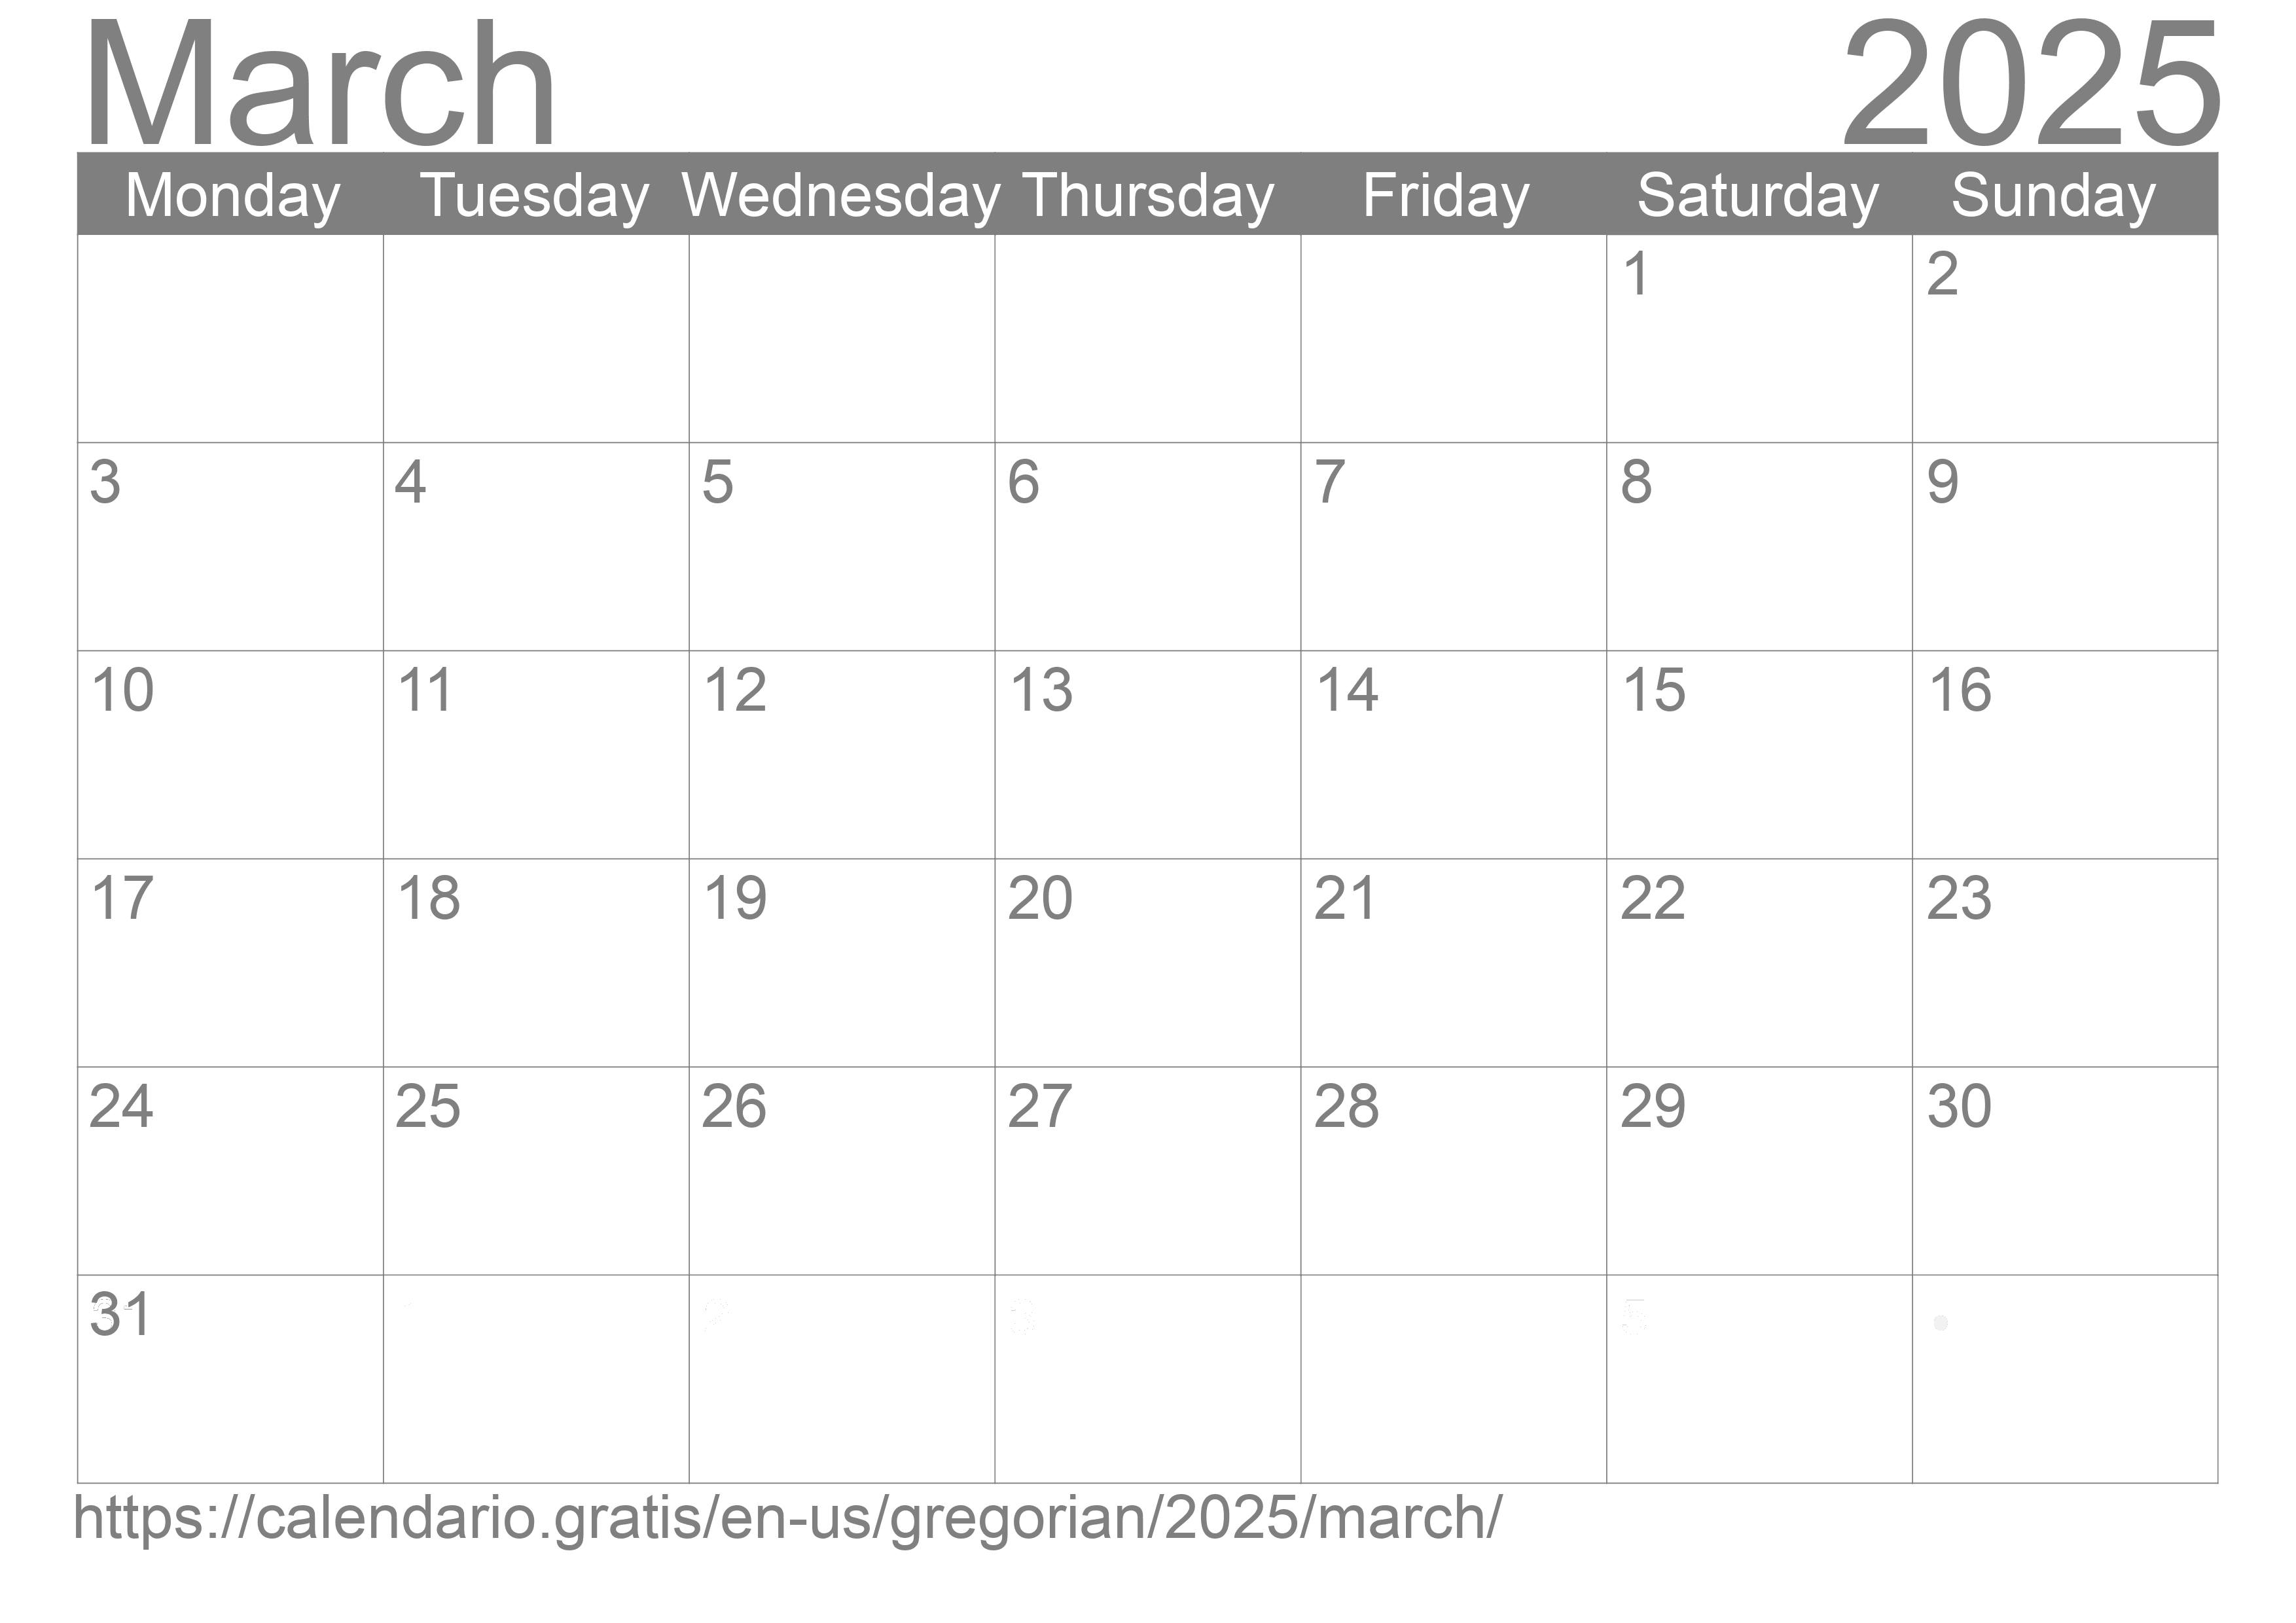 Calendar March 2025 from United States of America in English ☑️